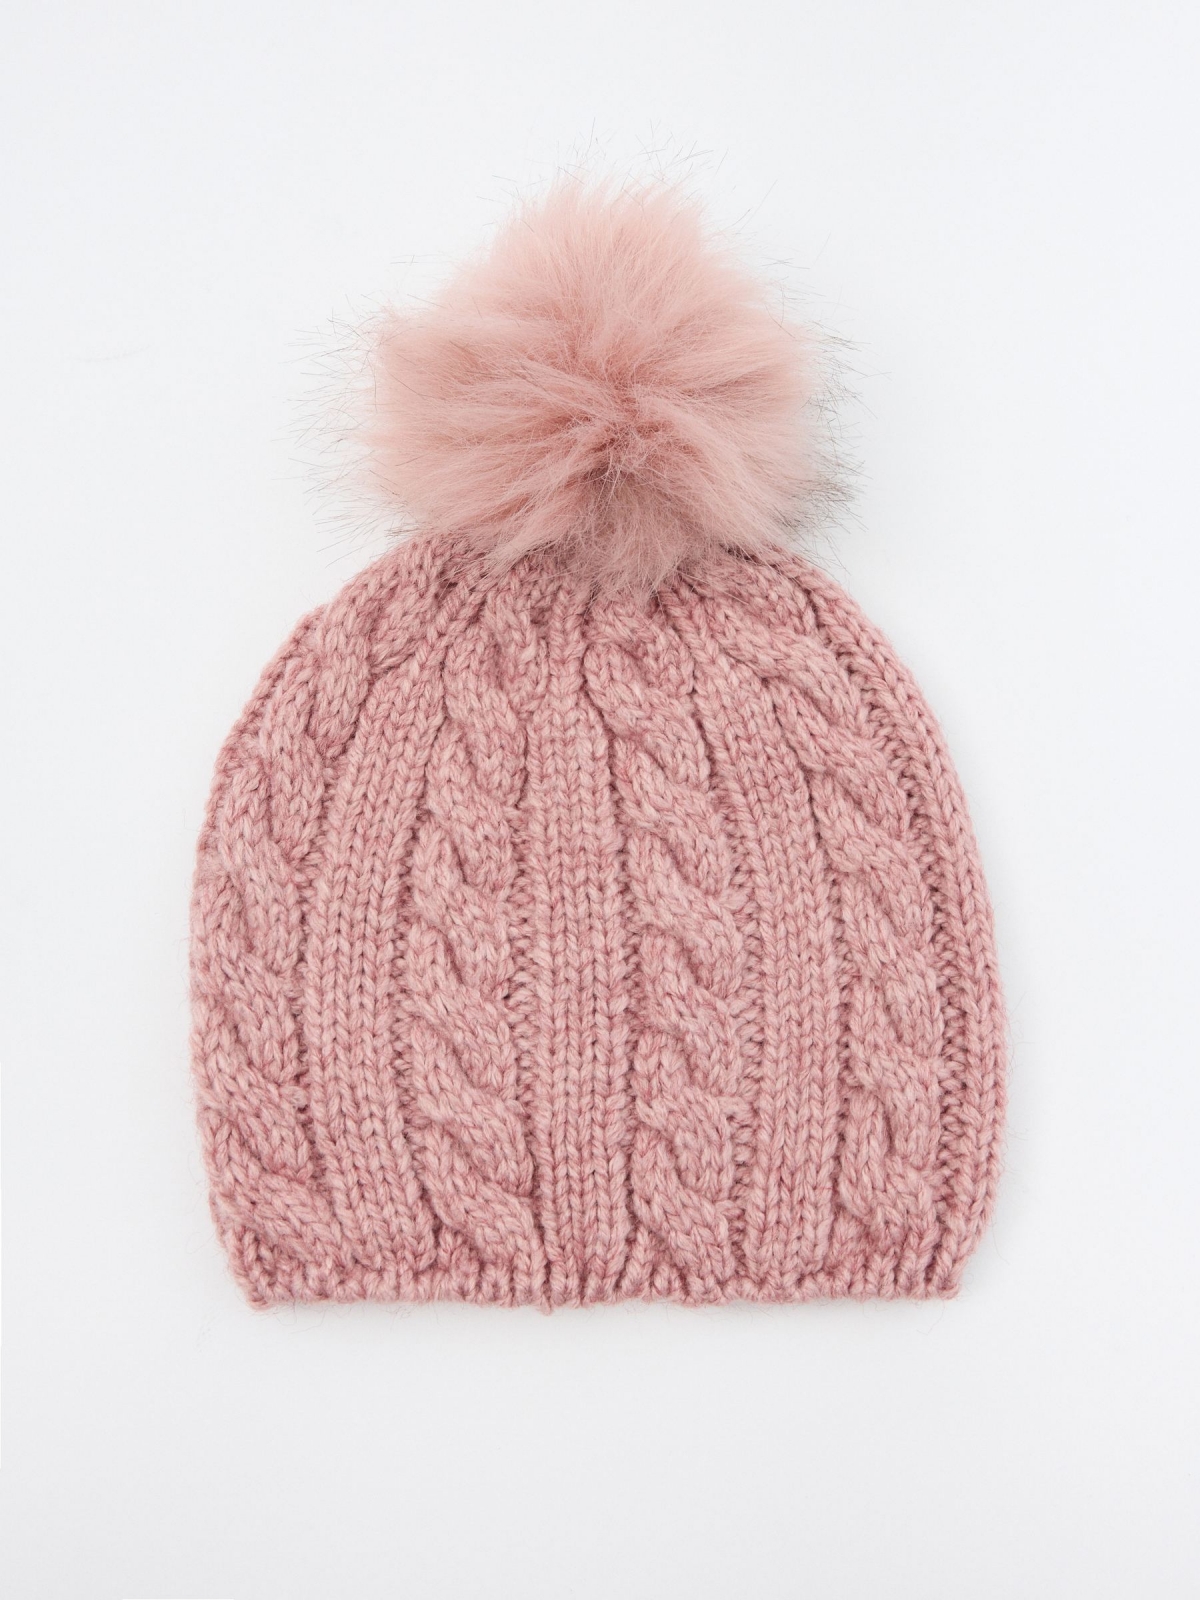 Pink braided hat with pompom design